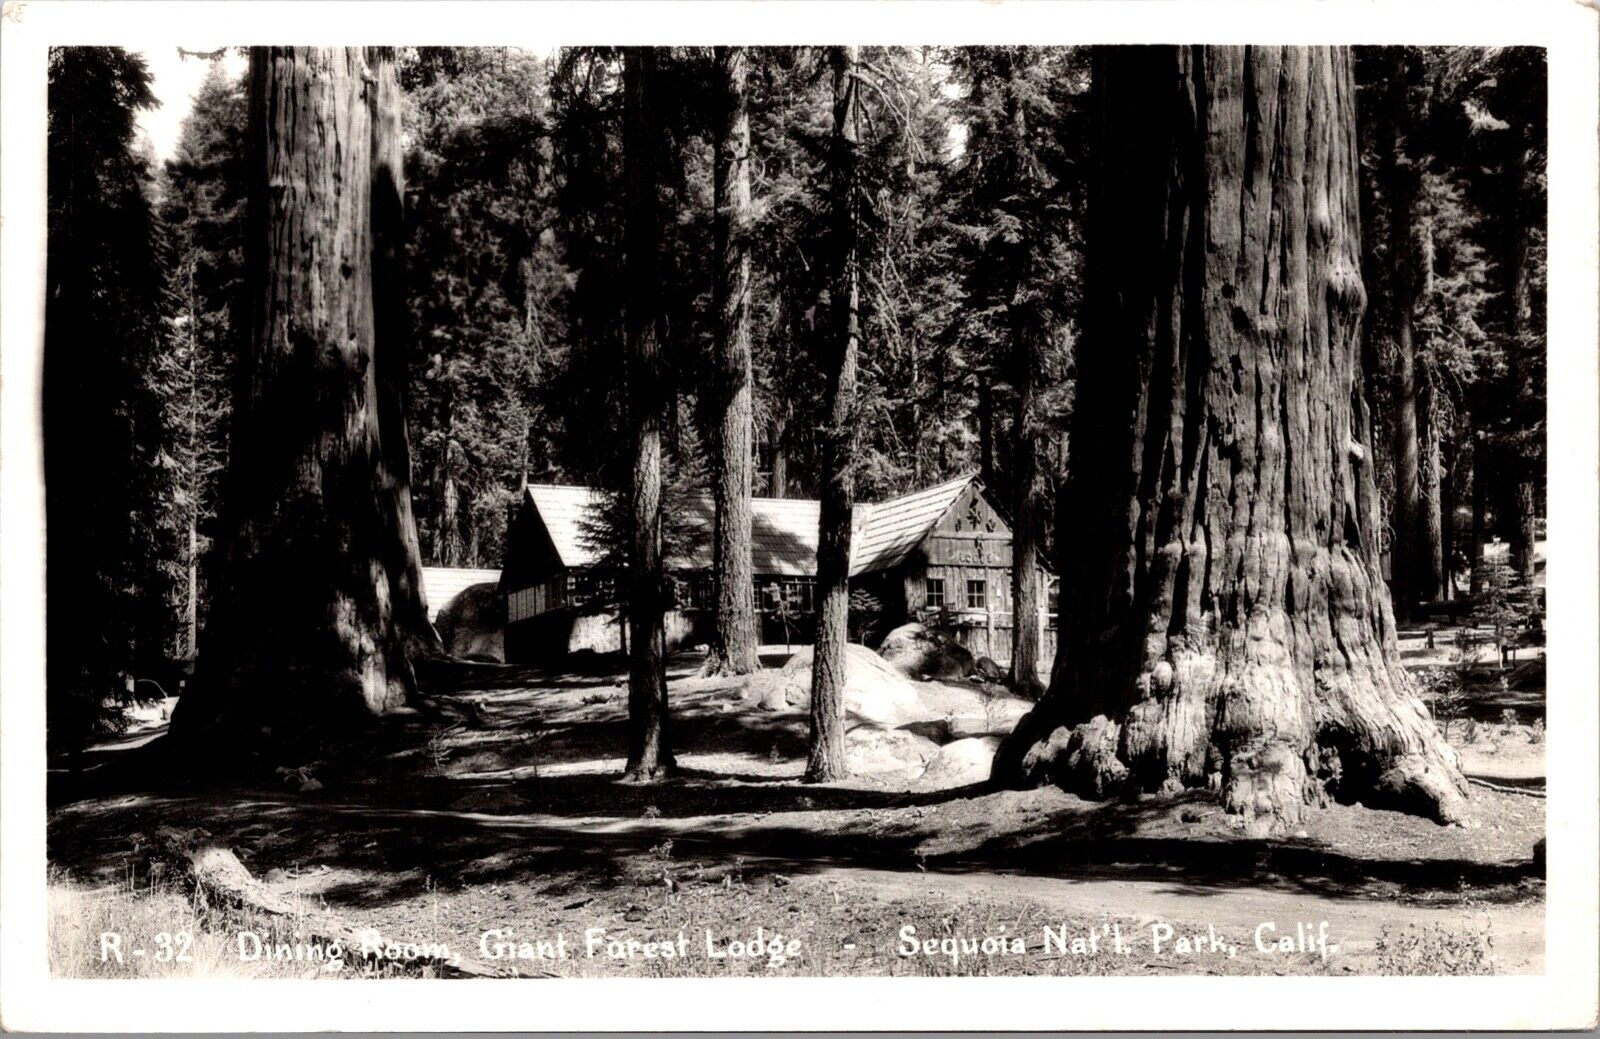 RP Postcard Dining Rooms Giant Forest Lodge Sequoia National Park California